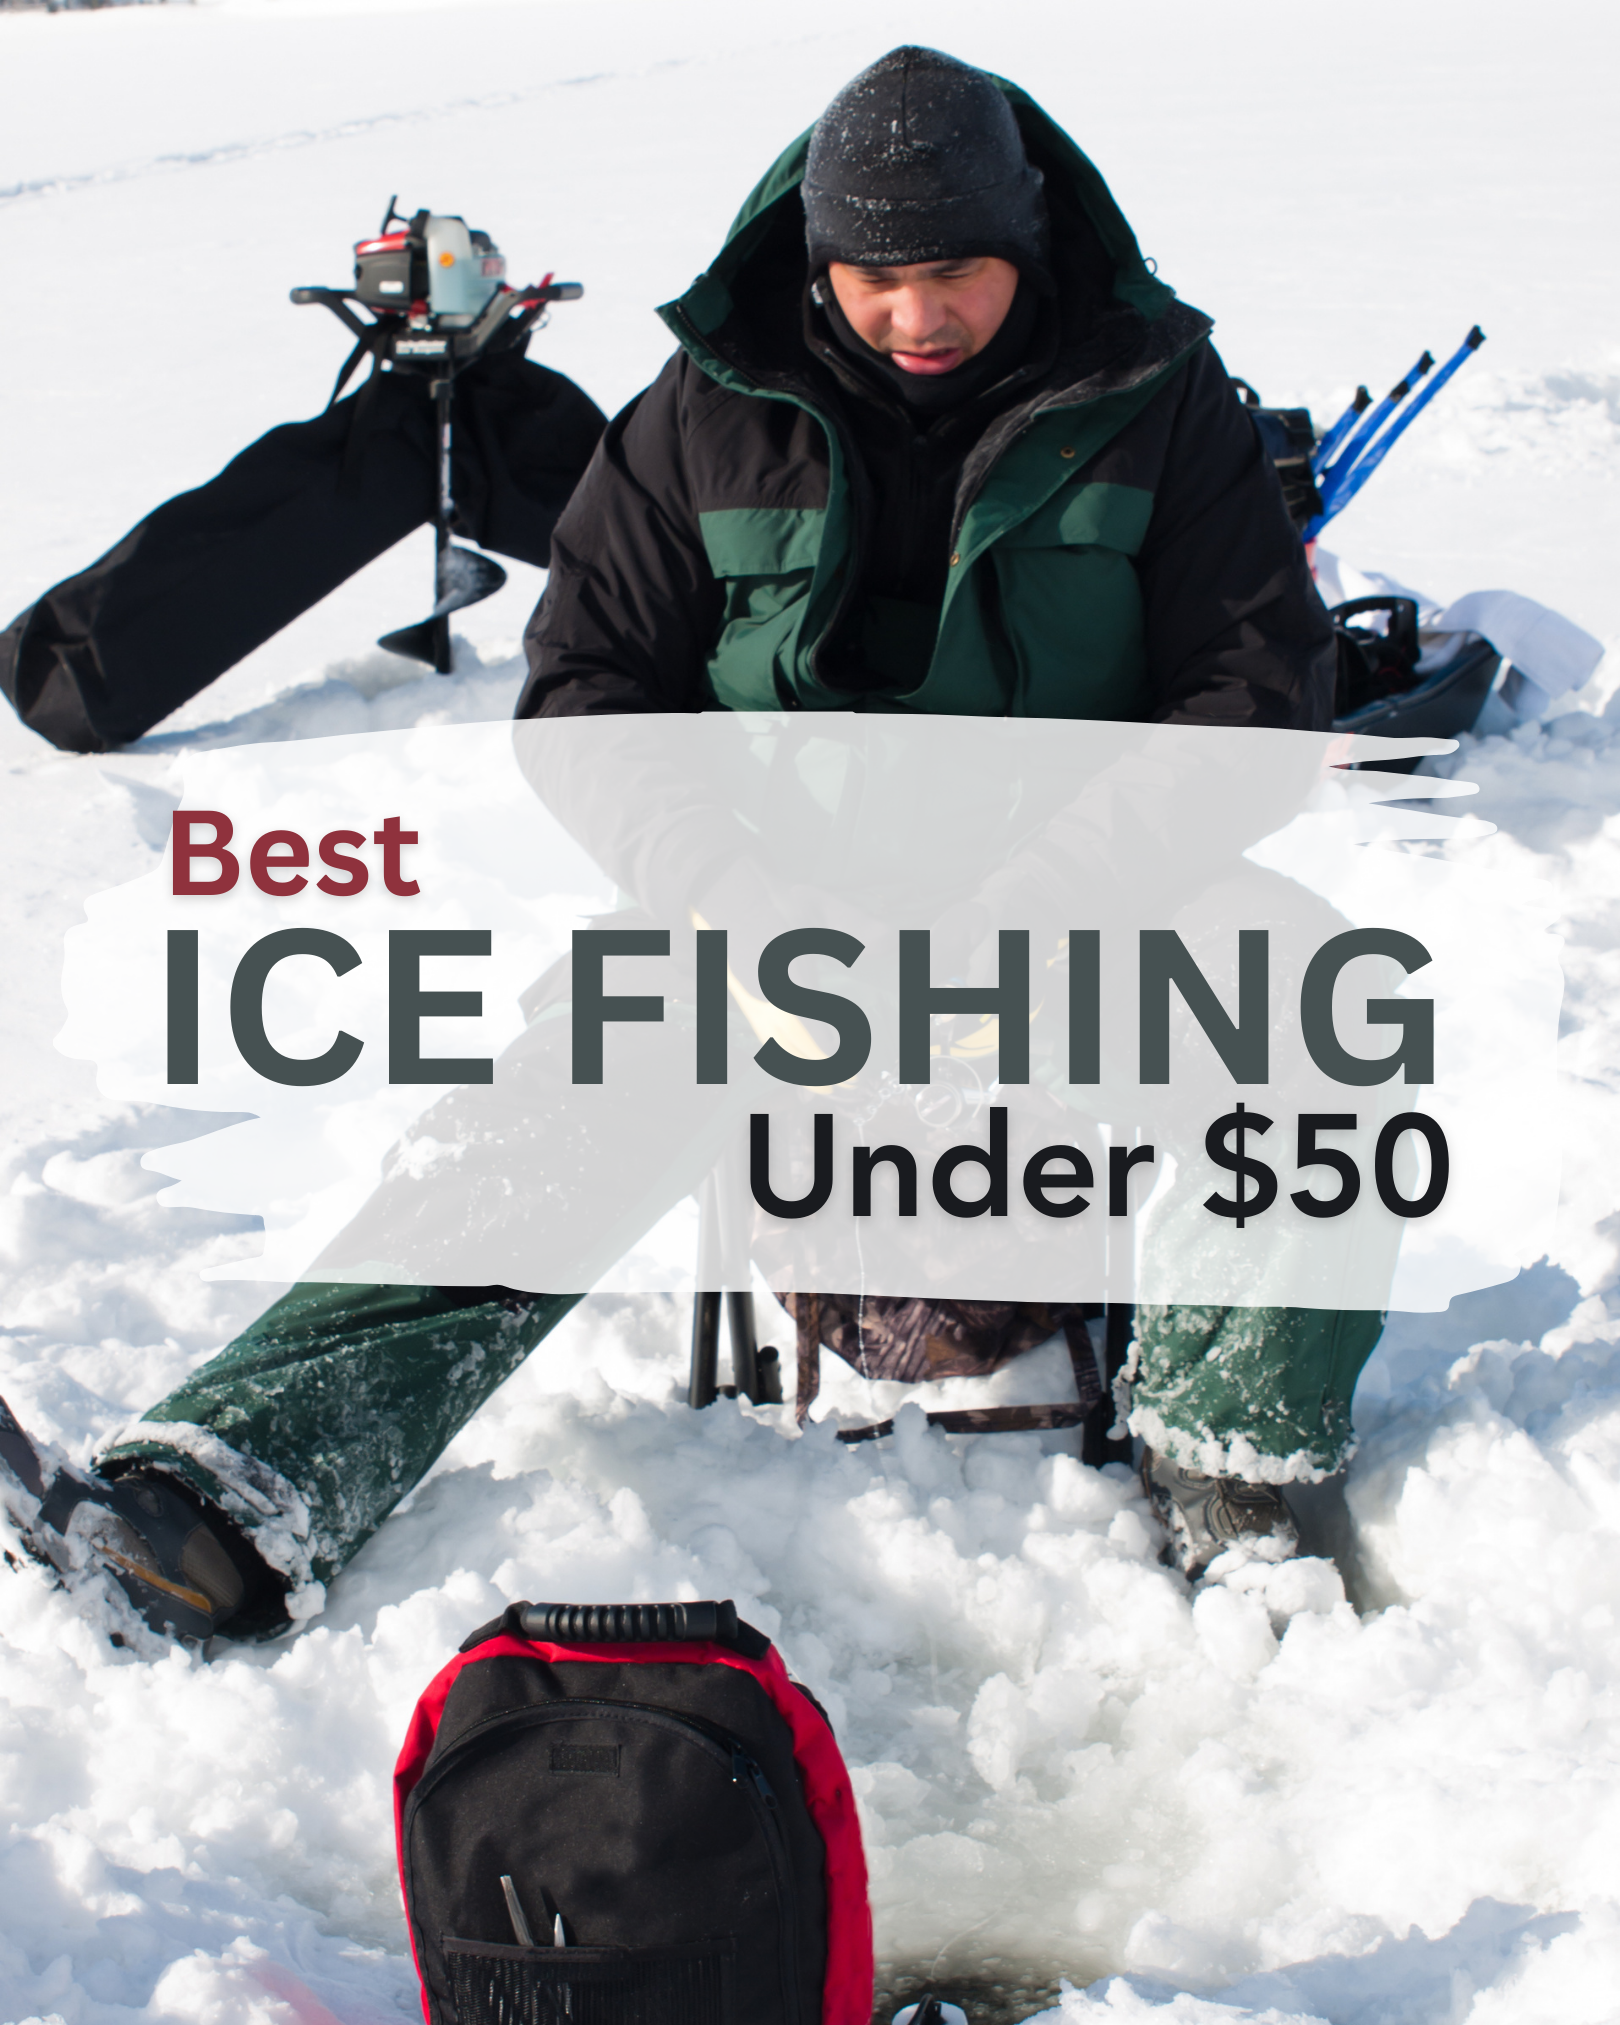 Amazon 5 Best Ice Fishing Combo Under $50 | Best Life Reviews